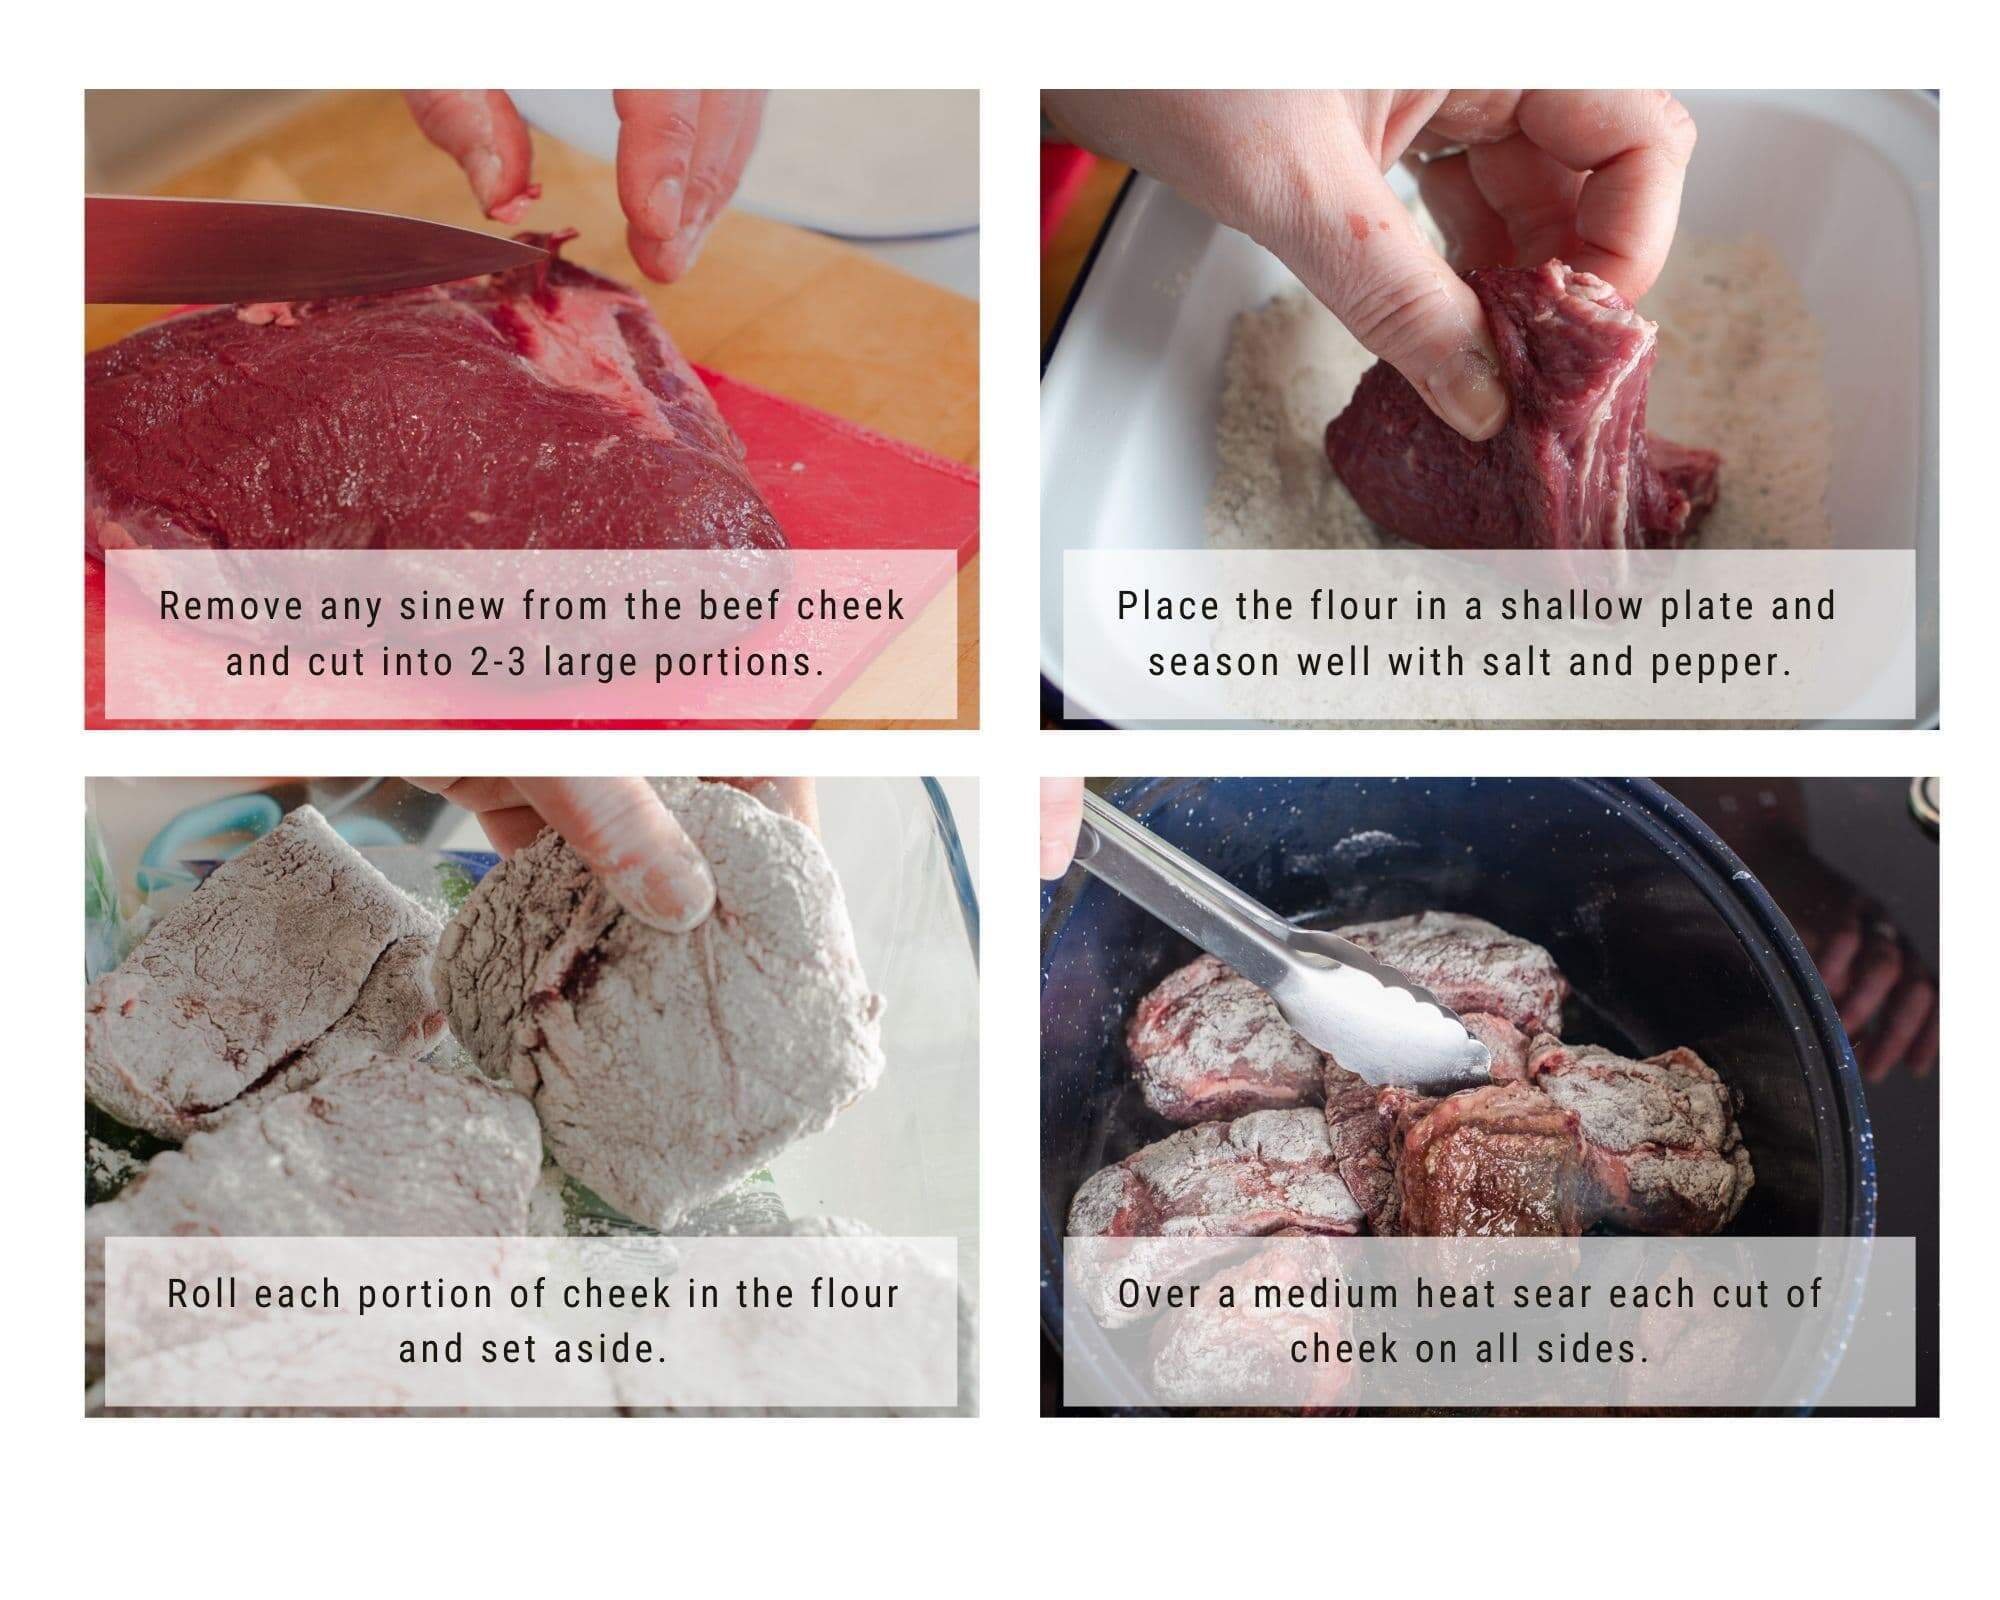 How to prepare beef cheeks step by step.